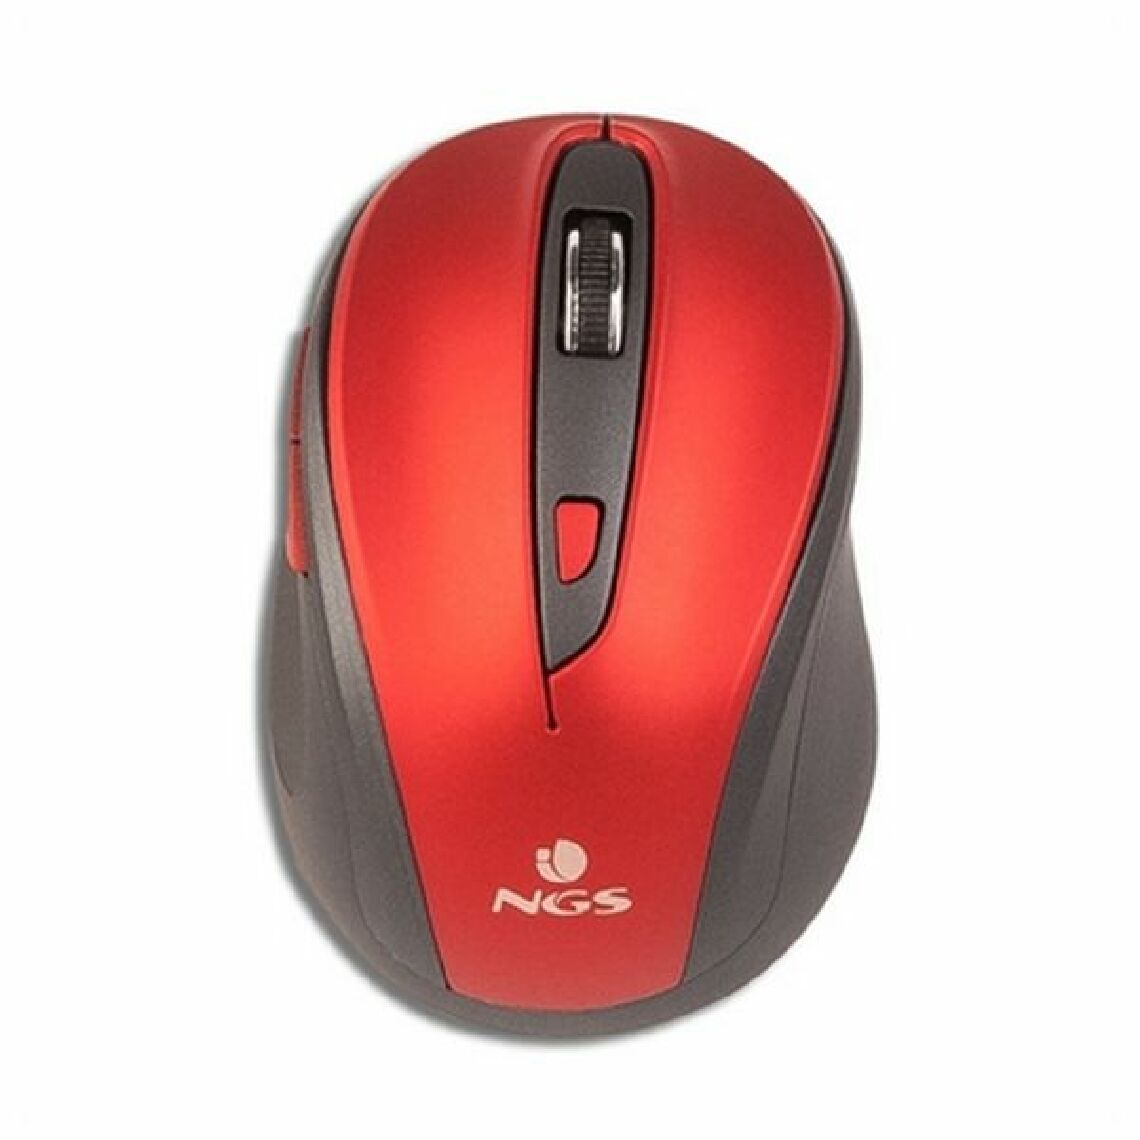 Ngs - Souris sans-fil NGS EVOMUTERED Plug and play Rouge - Souris